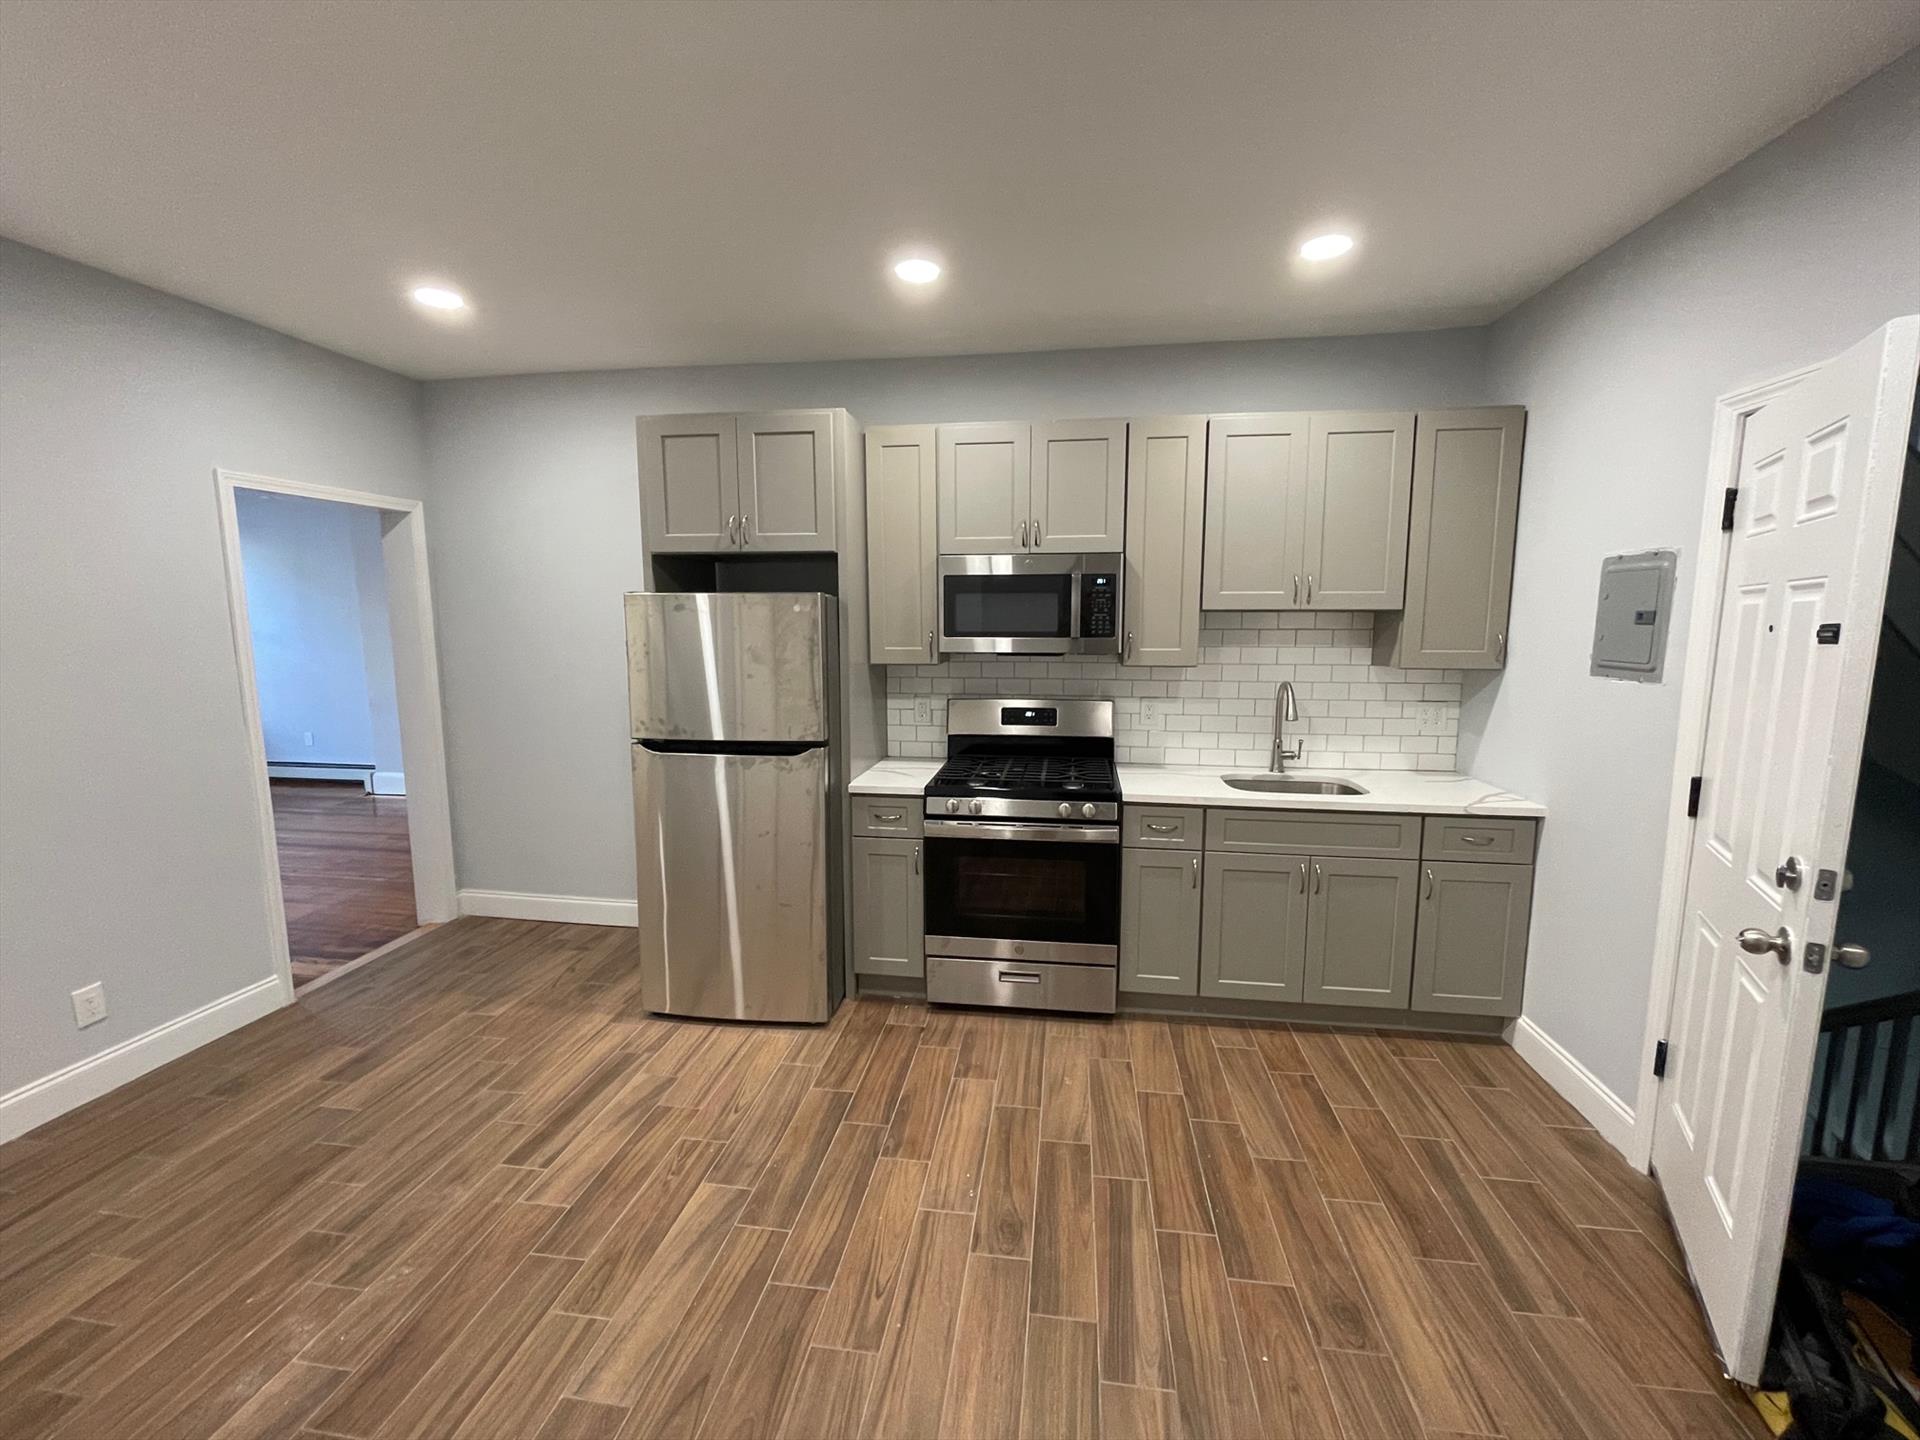 Great newly renovated 2 bedroom apartment! Apartment features hardwood floors, newly gut renovated bathroom, a brand new kitchen and washer dryer in unit! Available 7/1/24. Tenant pays broker fee. 